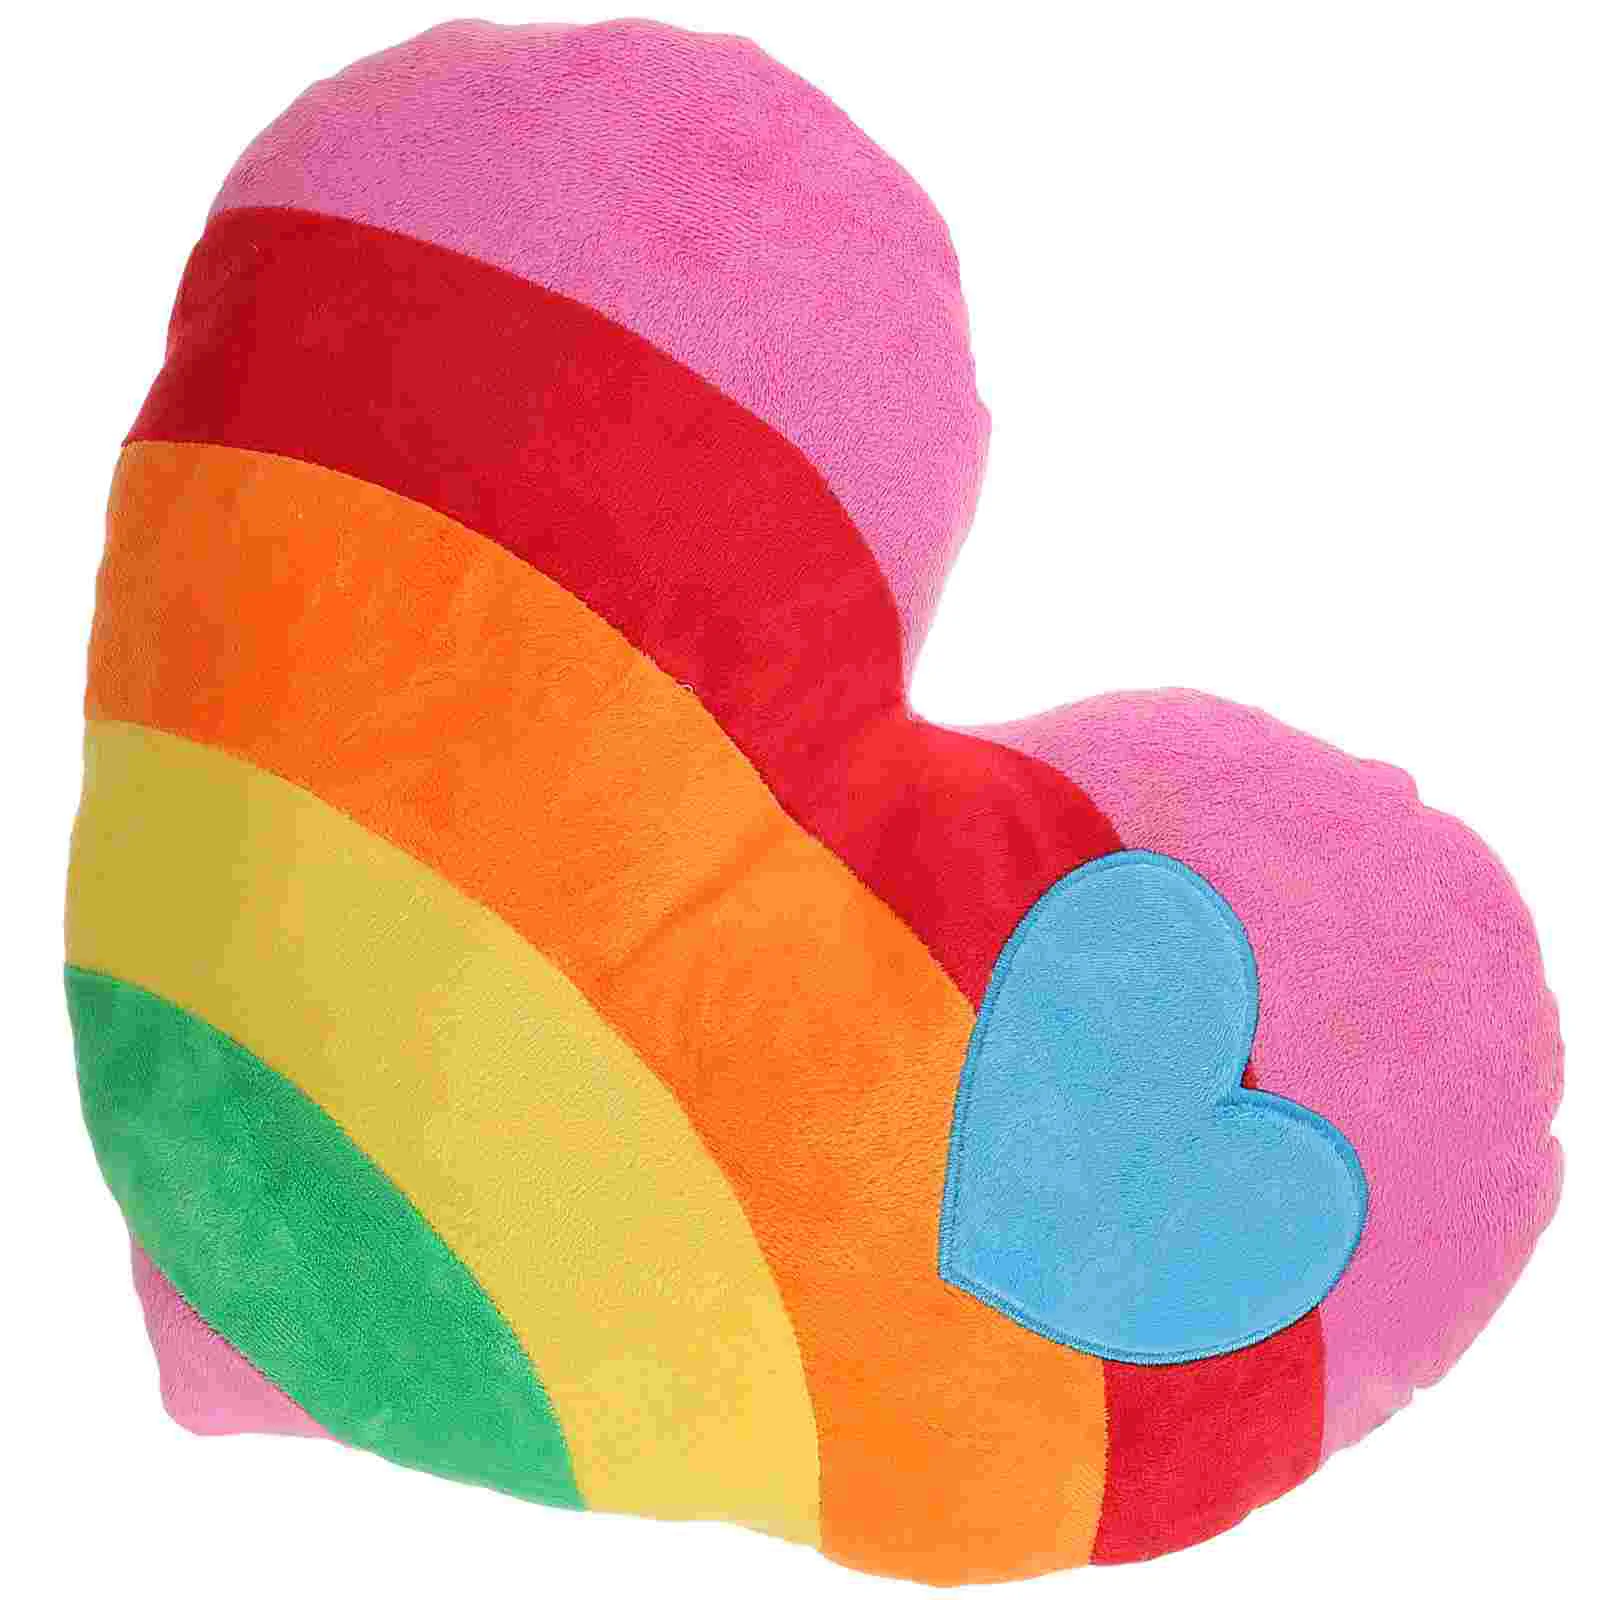 

Sofa Throw Pillow Heart Cushion Pillows for Bed Couch Animal Modeling Shape Pilllow Toddler